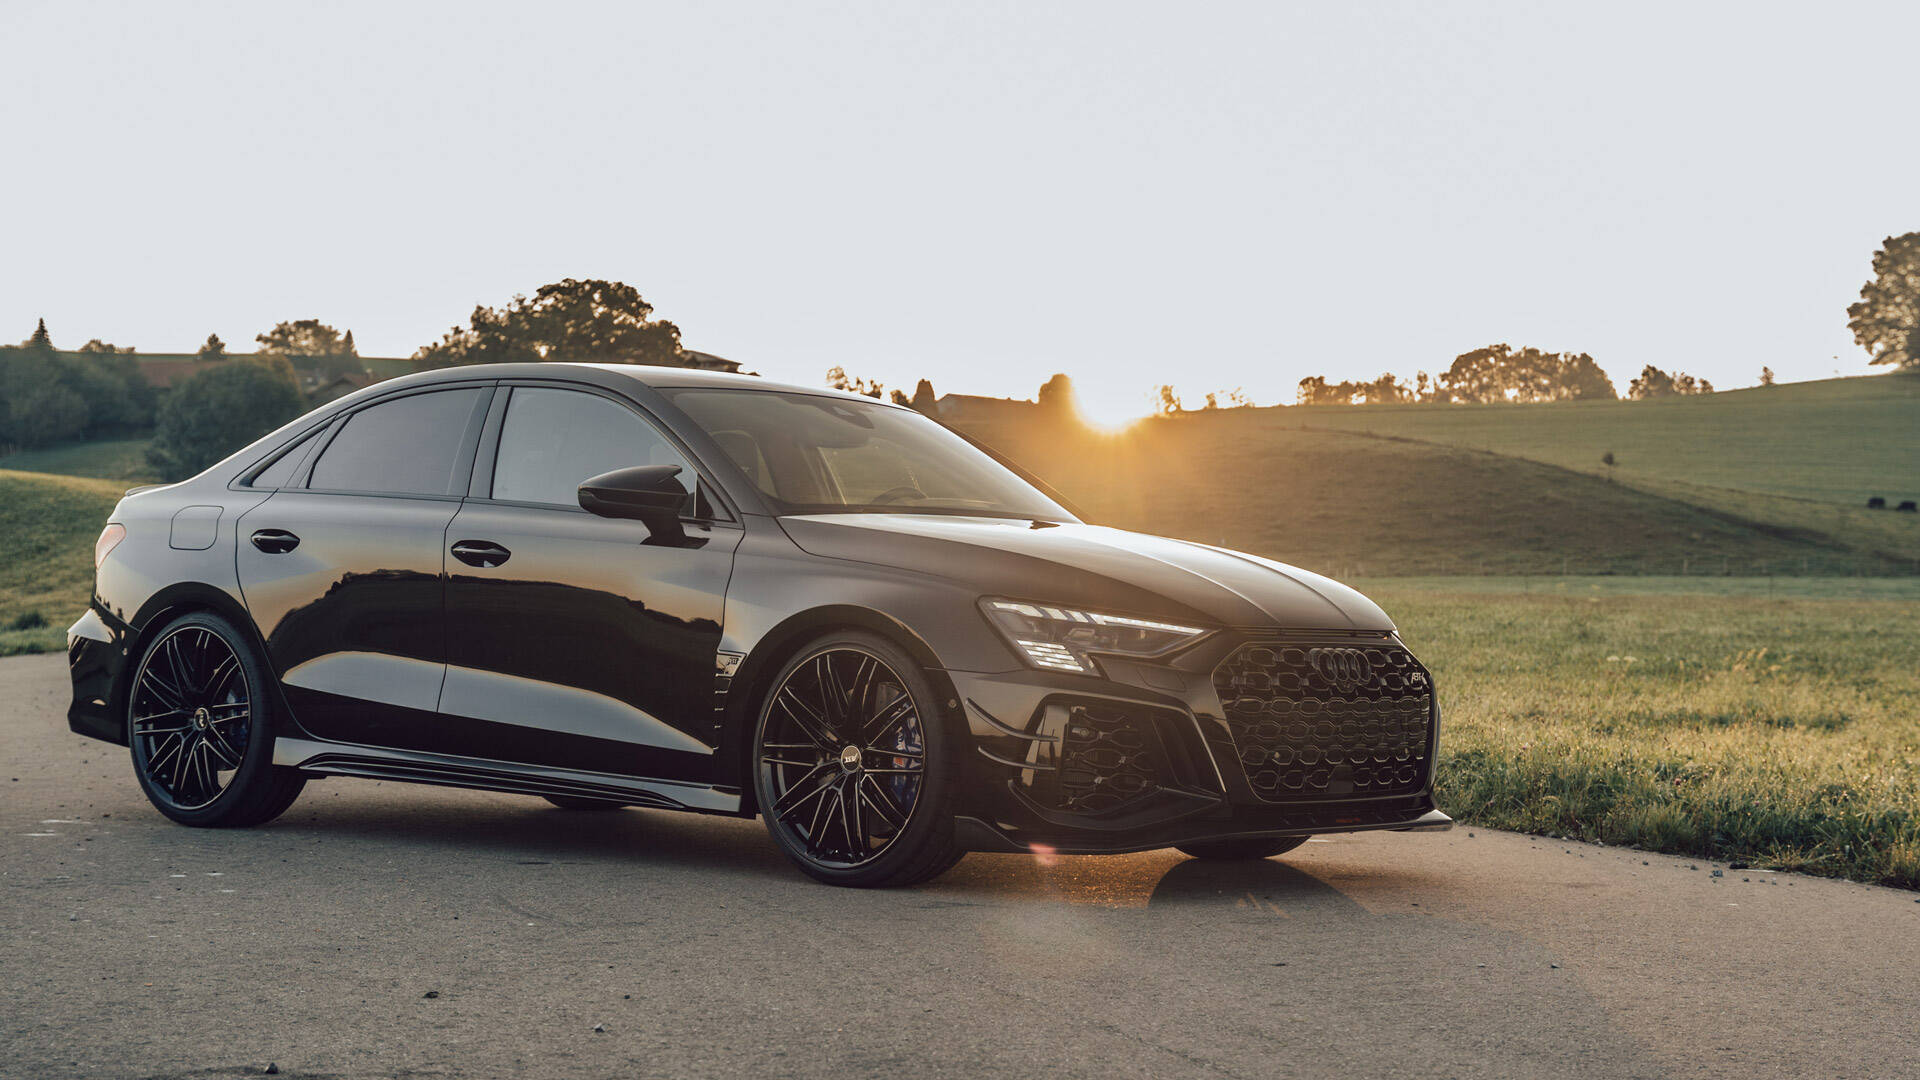 Low consumption, high driving enjoyment – more power for the basic engines  in the Audi Q3 - Audi Tuning, VW Tuning, Chiptuning von ABT Sportsline.